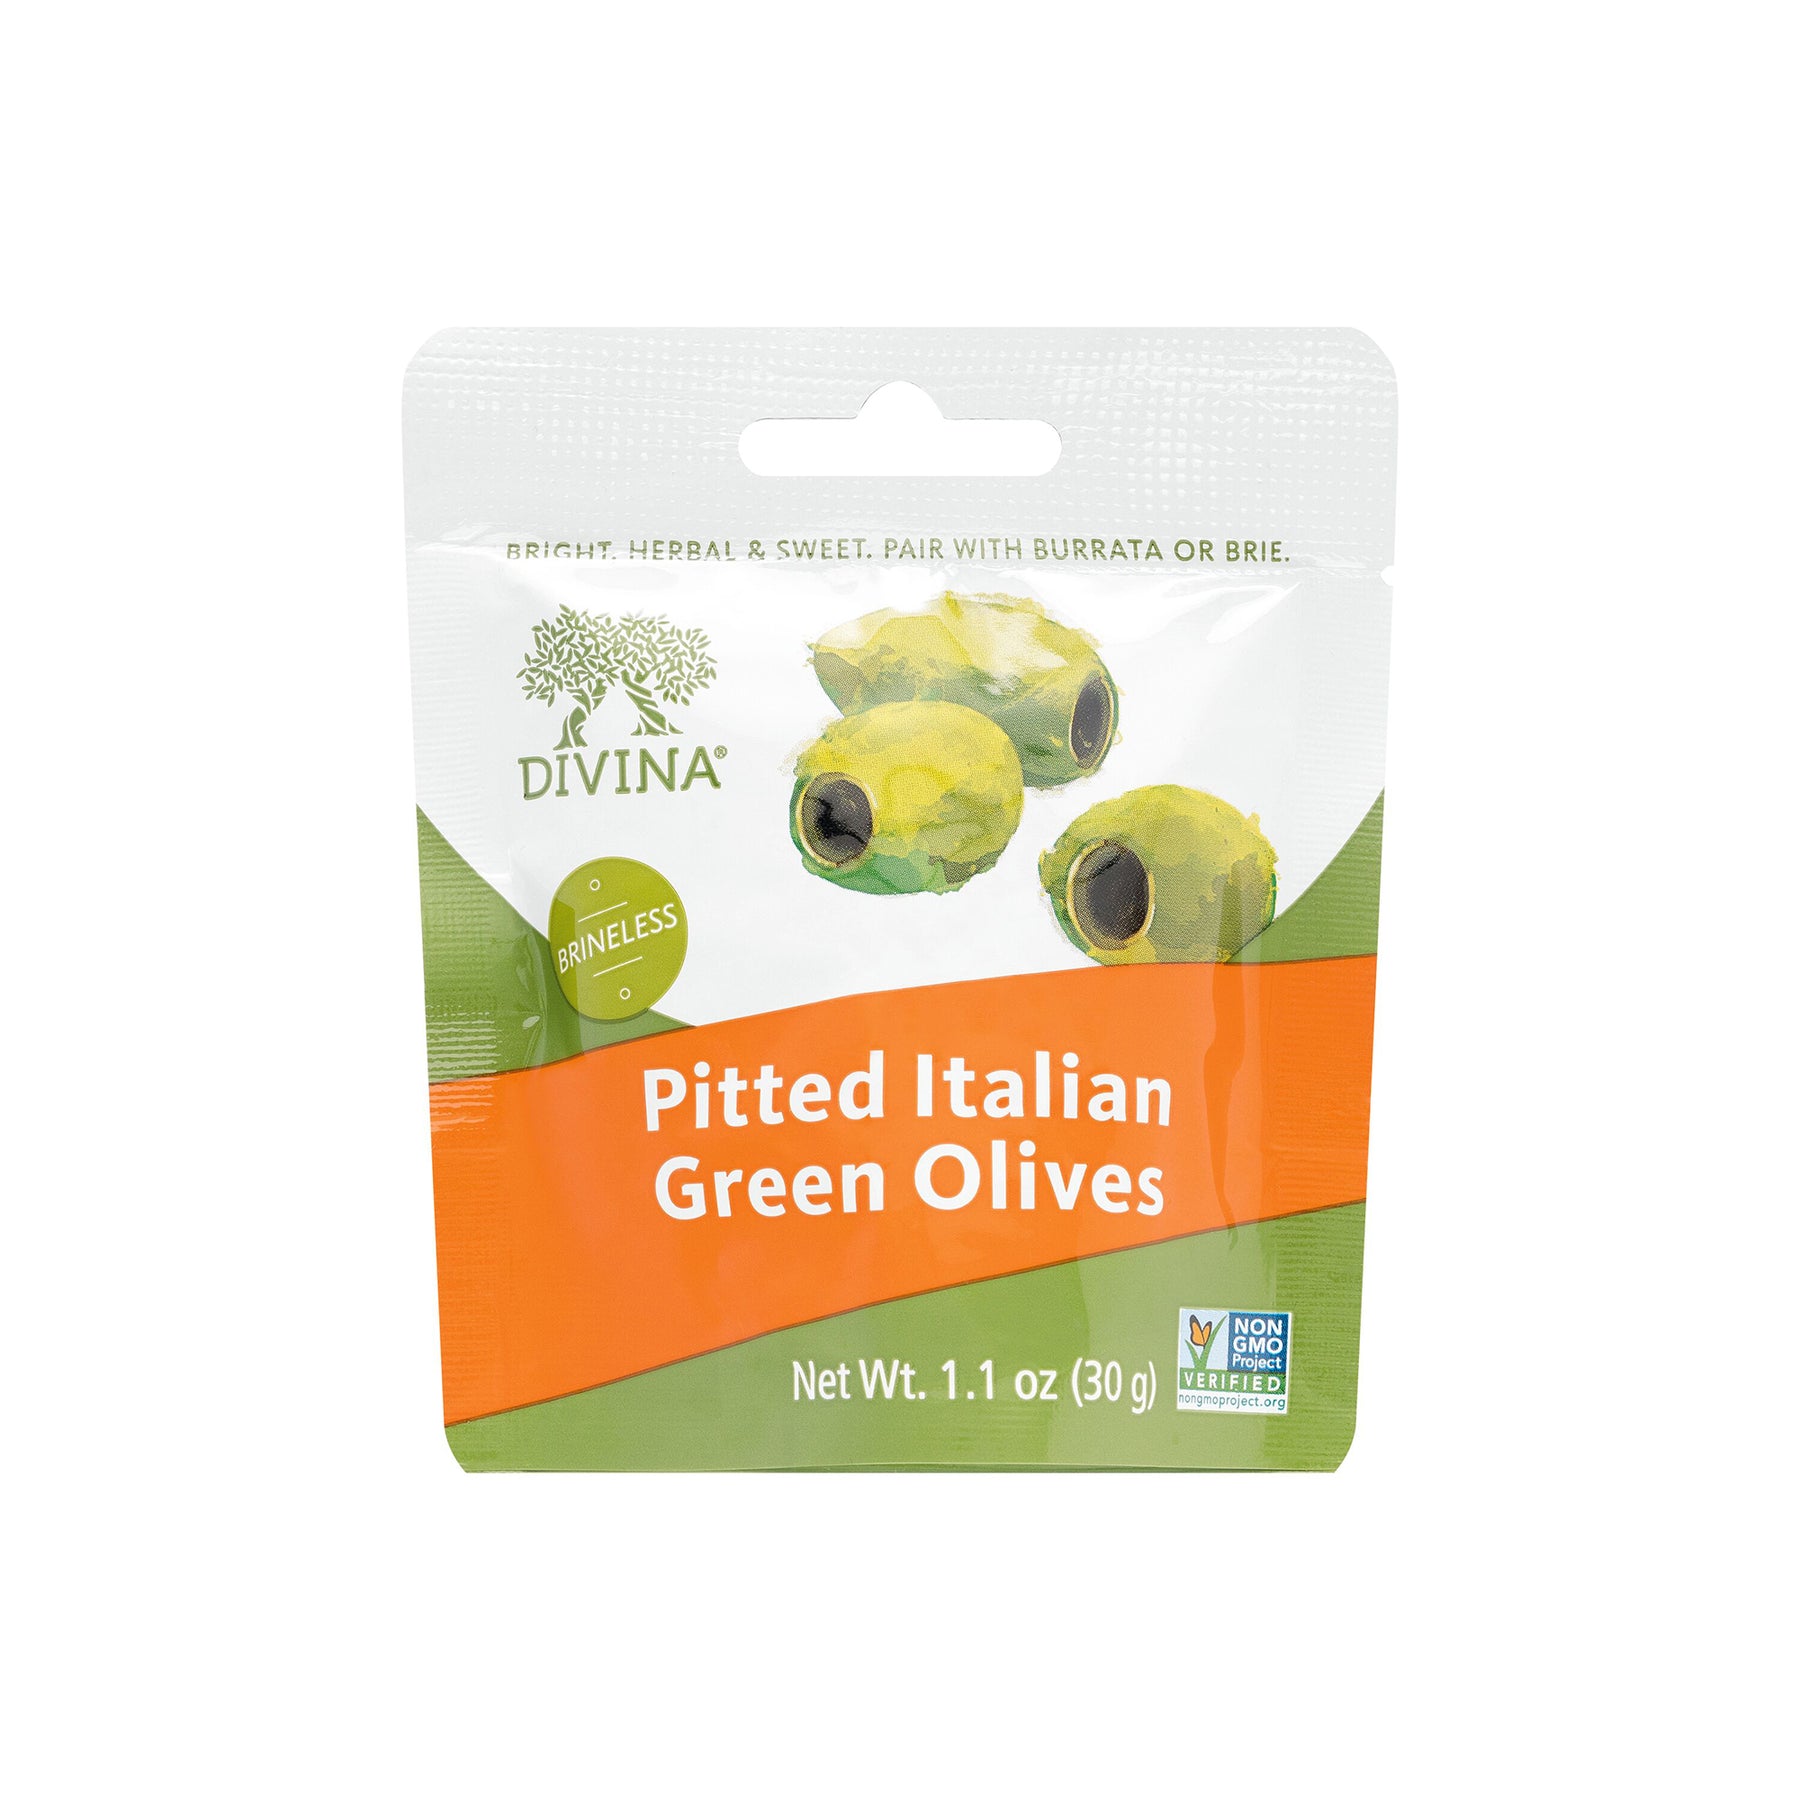 Pitted Italian Green Olives (Portion Packs)